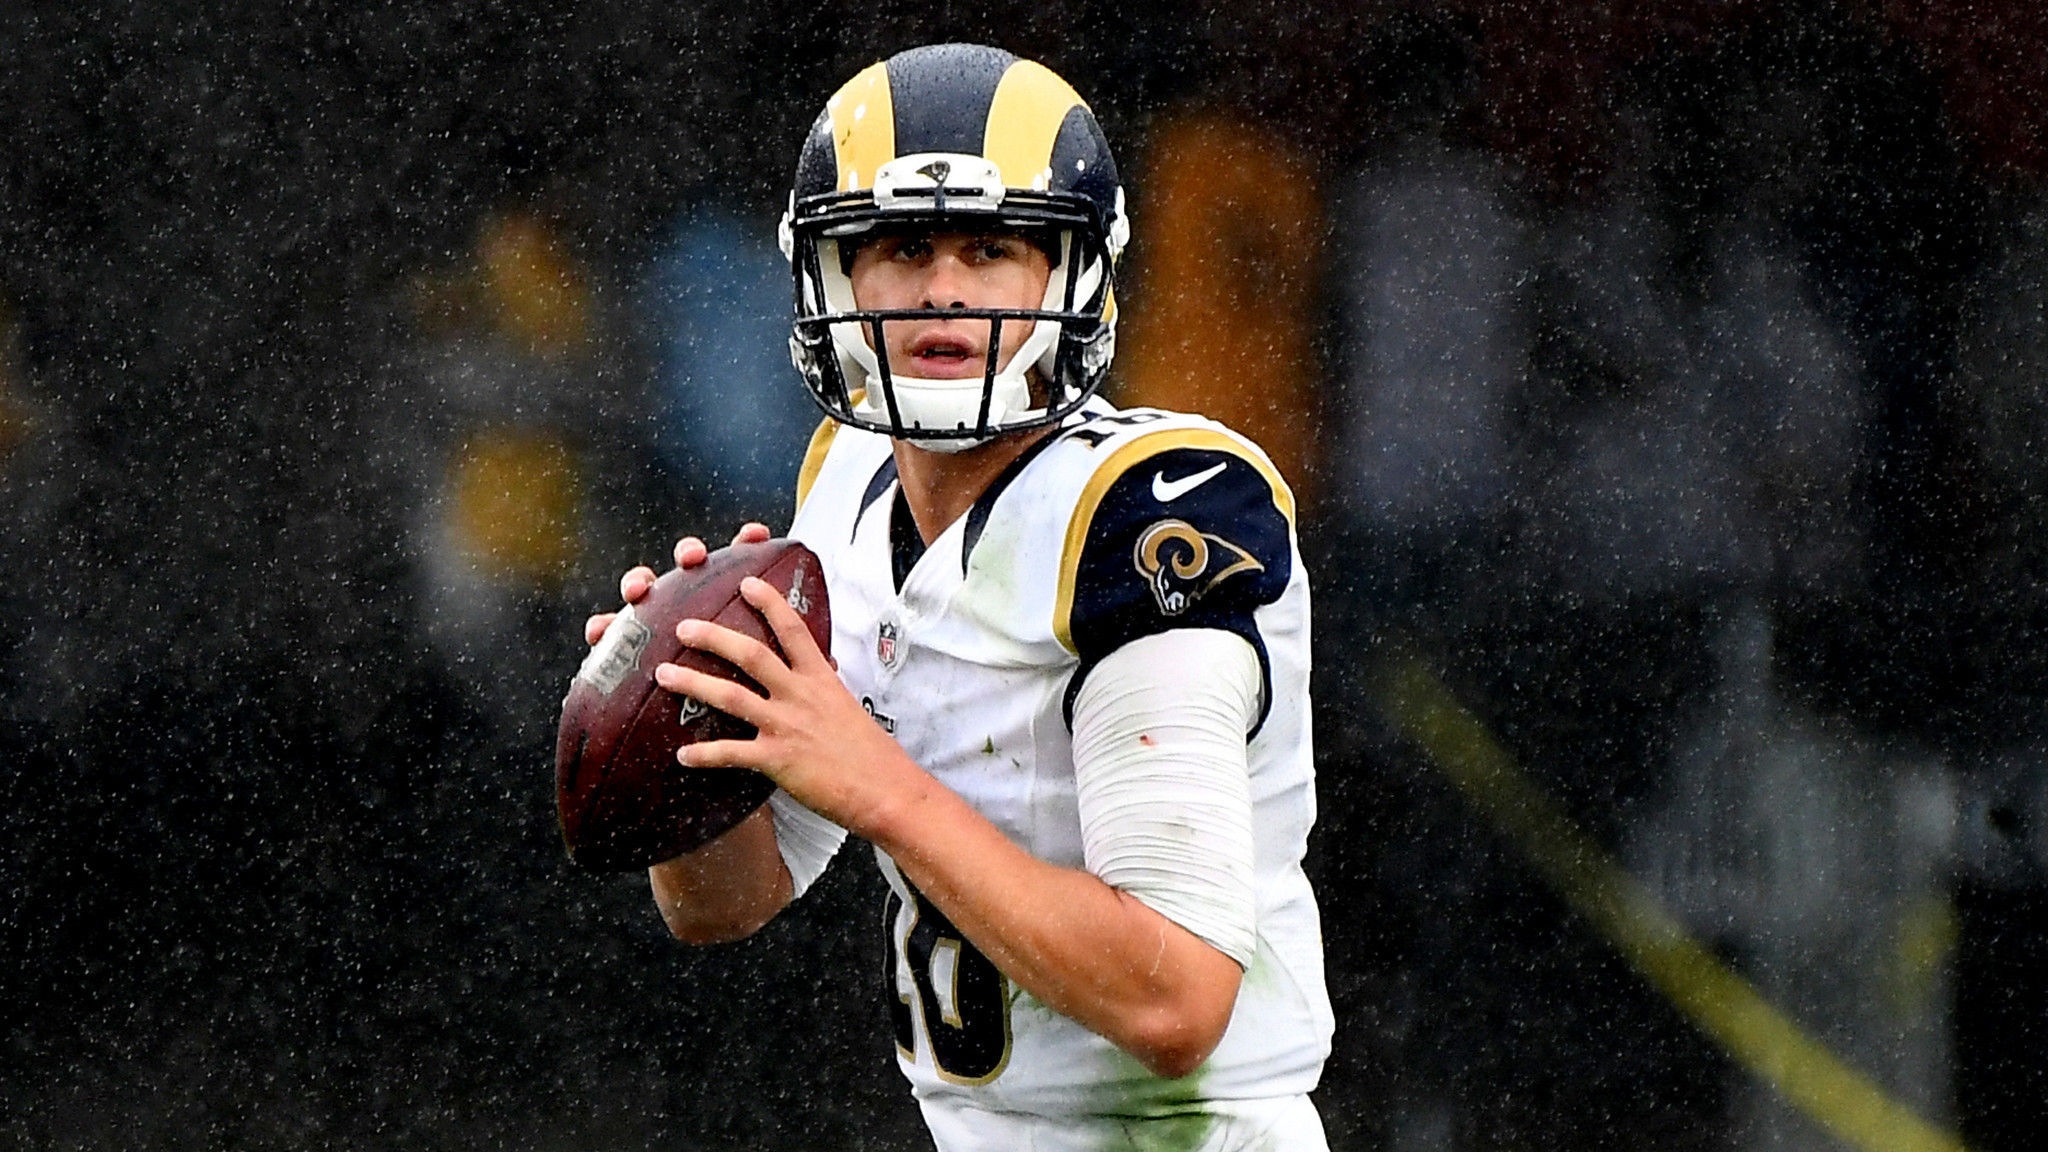 Jared Goff makes his debut, but the Rams dont really let him play